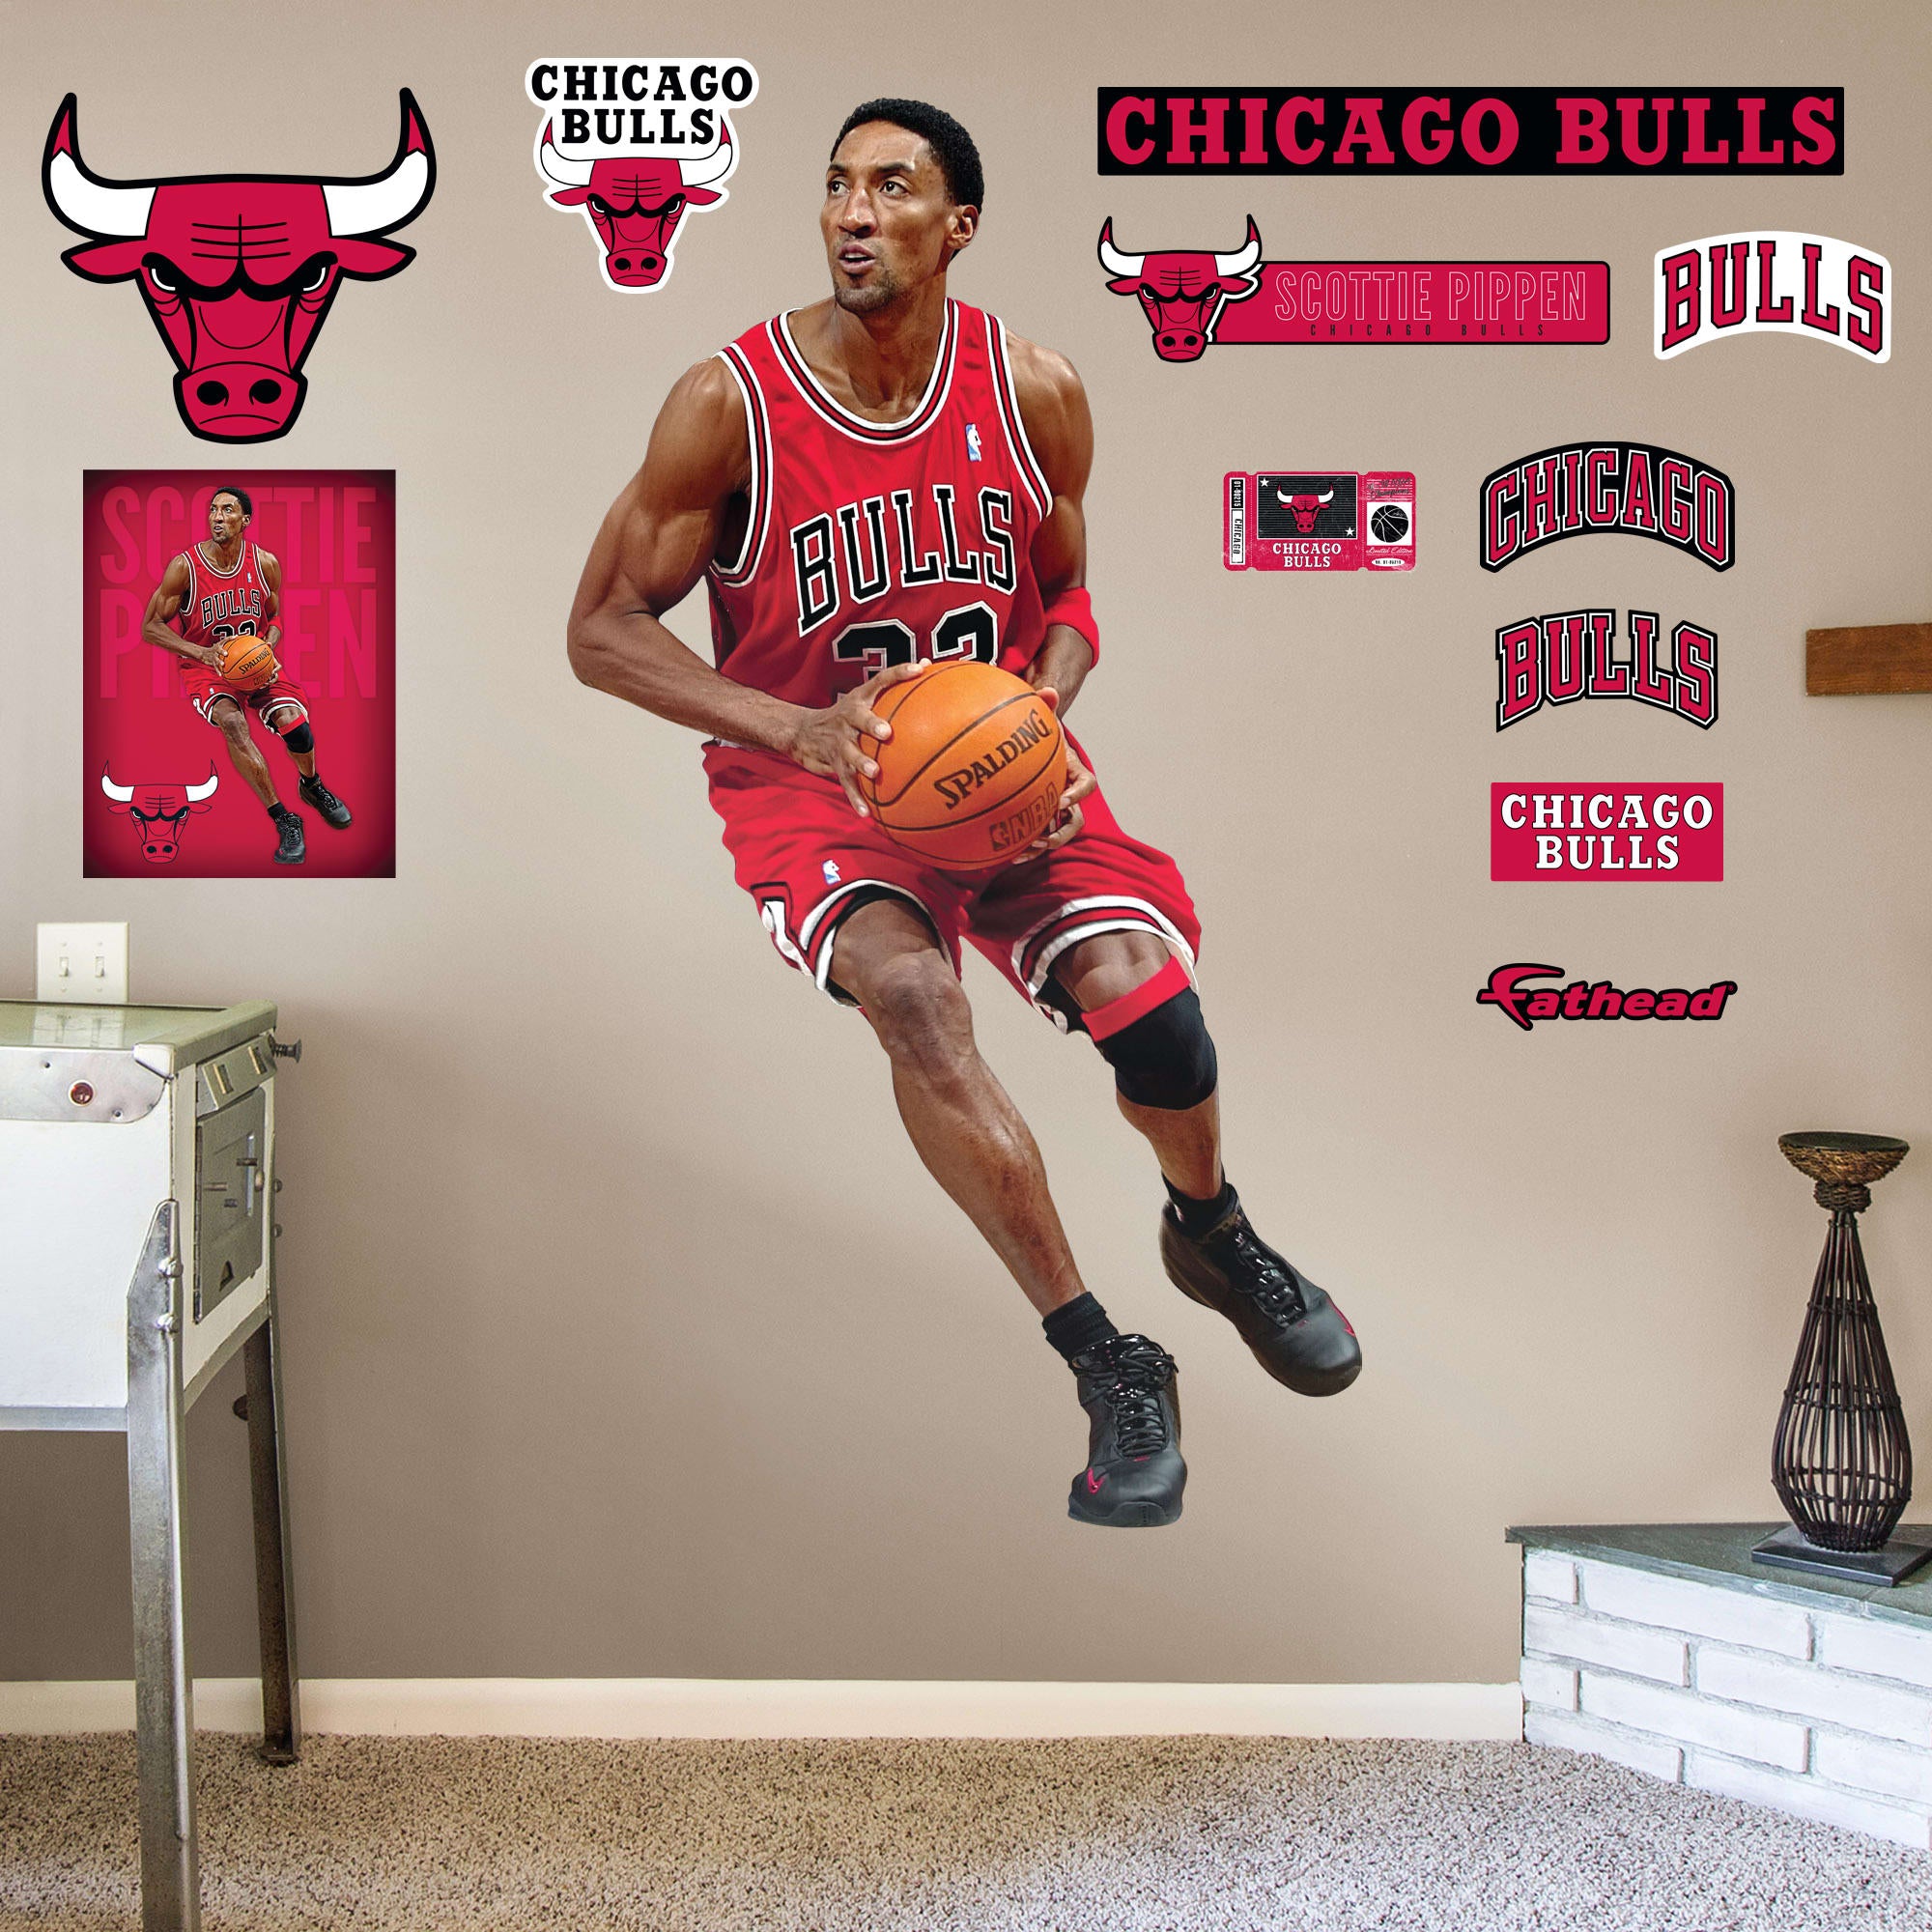 Scottie Pippen for Chicago Bulls - Officially Licensed NBA Removable Wall Decal Life-Size Athlete + 10 Decals (43"W x 78"H) by F